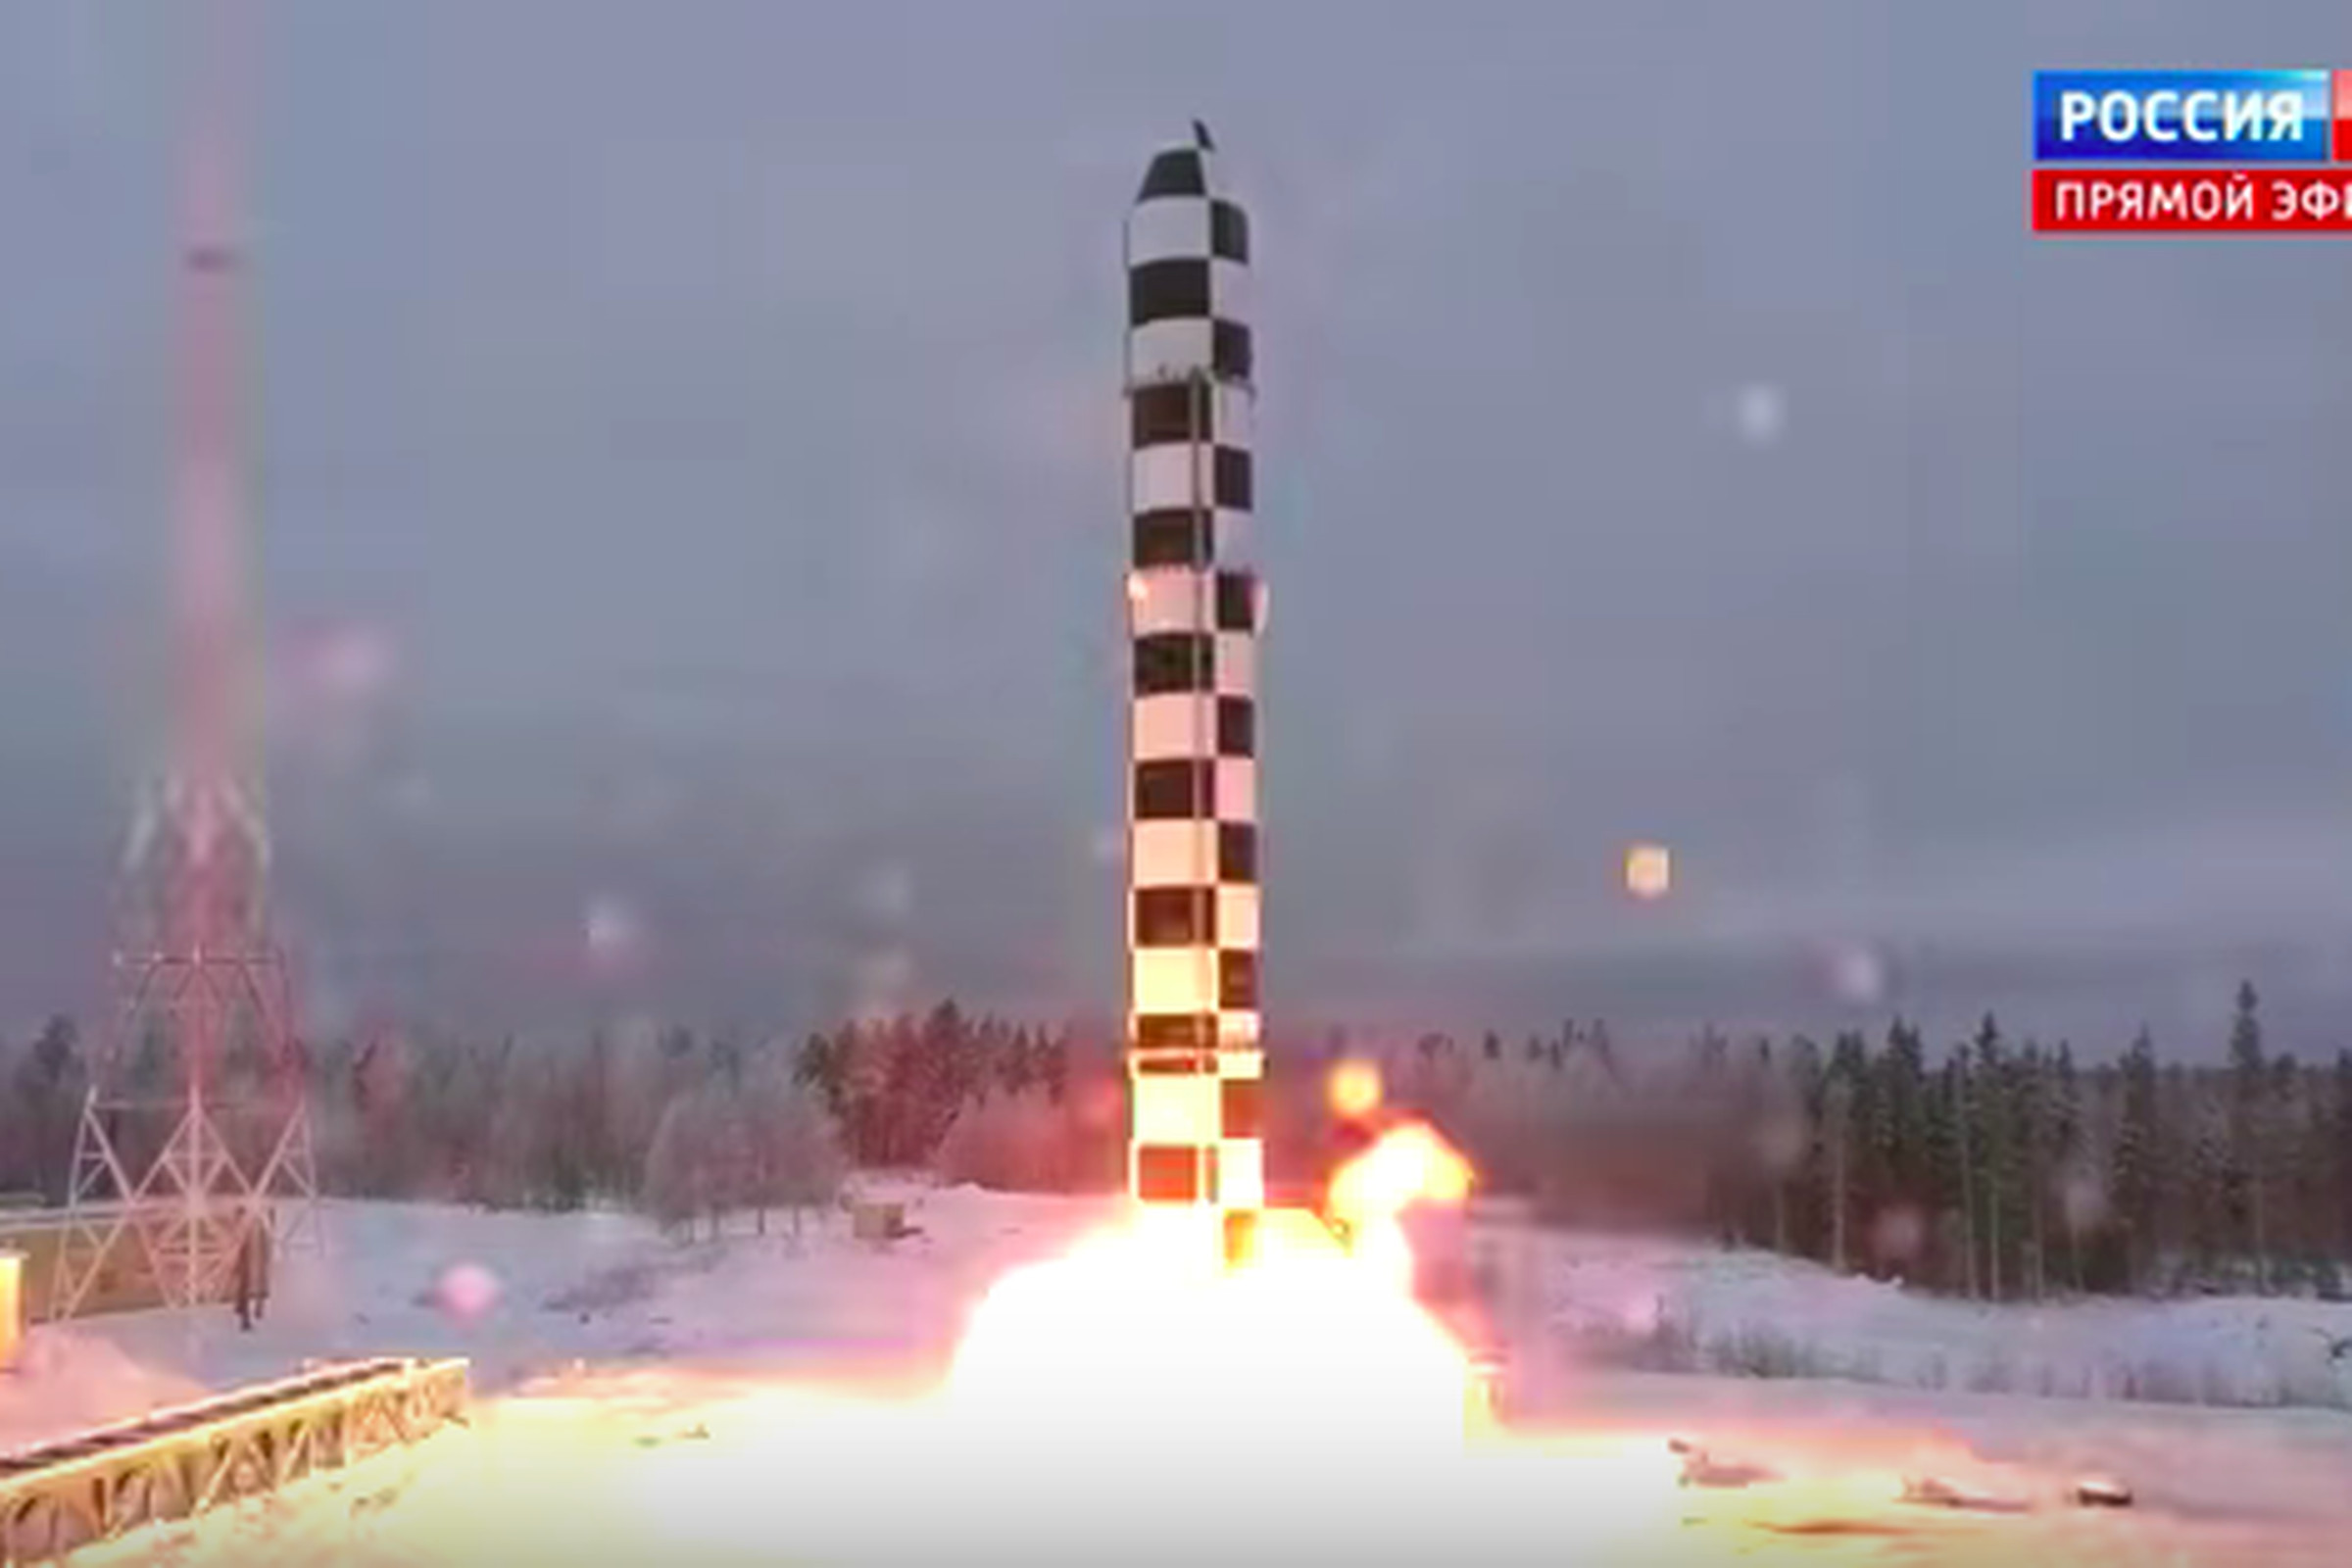 Missile test from Russia-24.